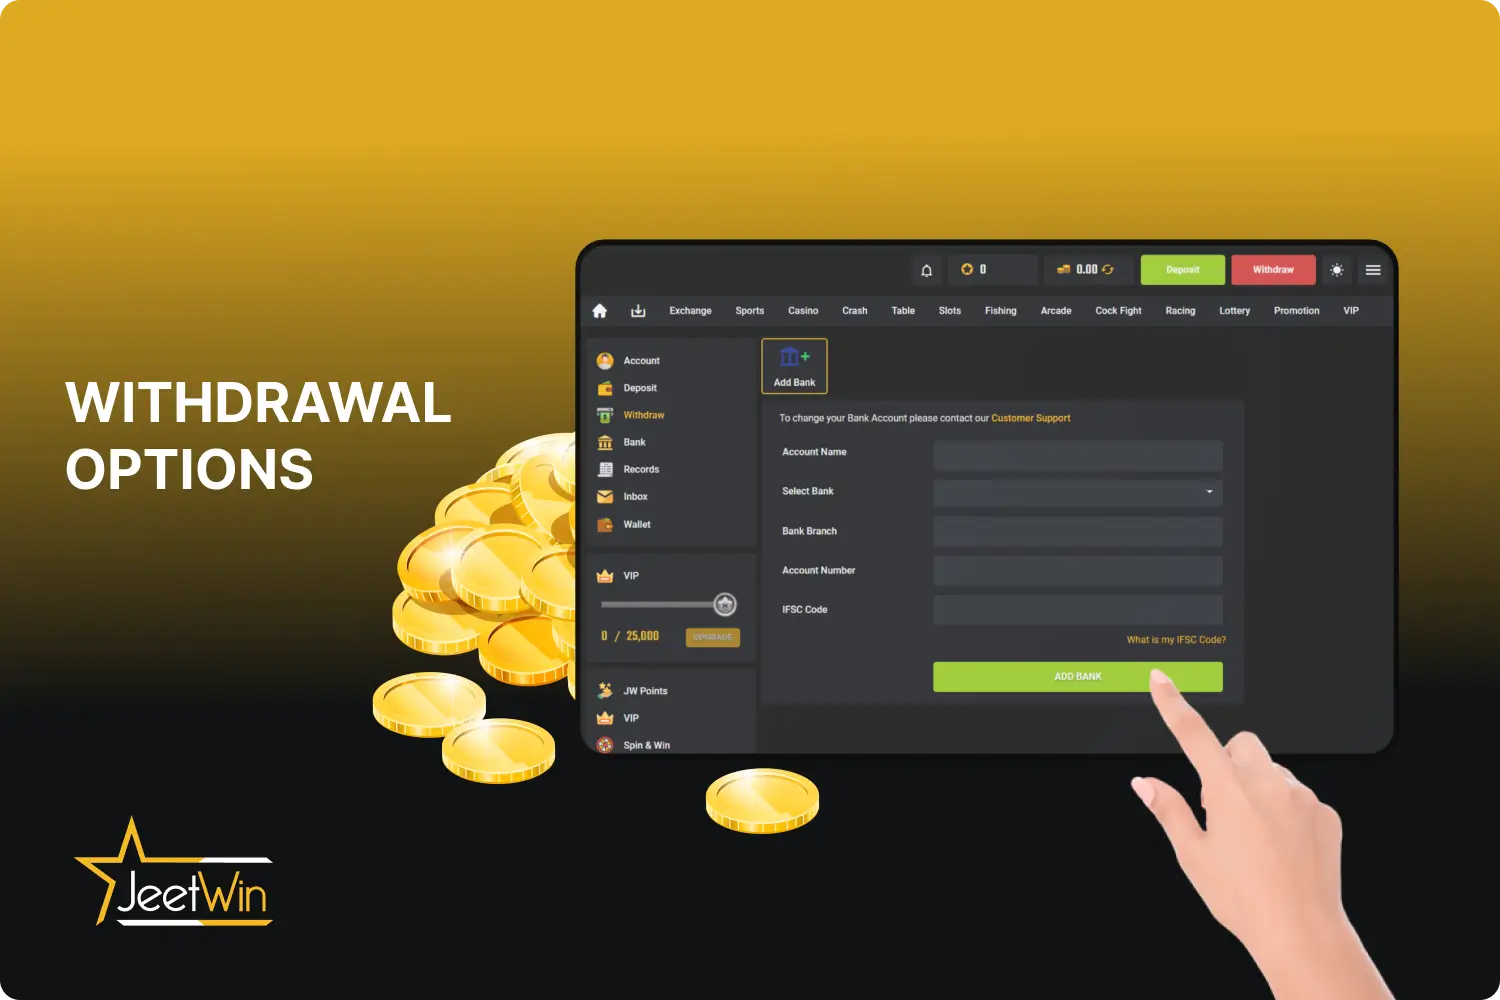 There are various withdrawal options available at Jeetwin that can be used by users from India